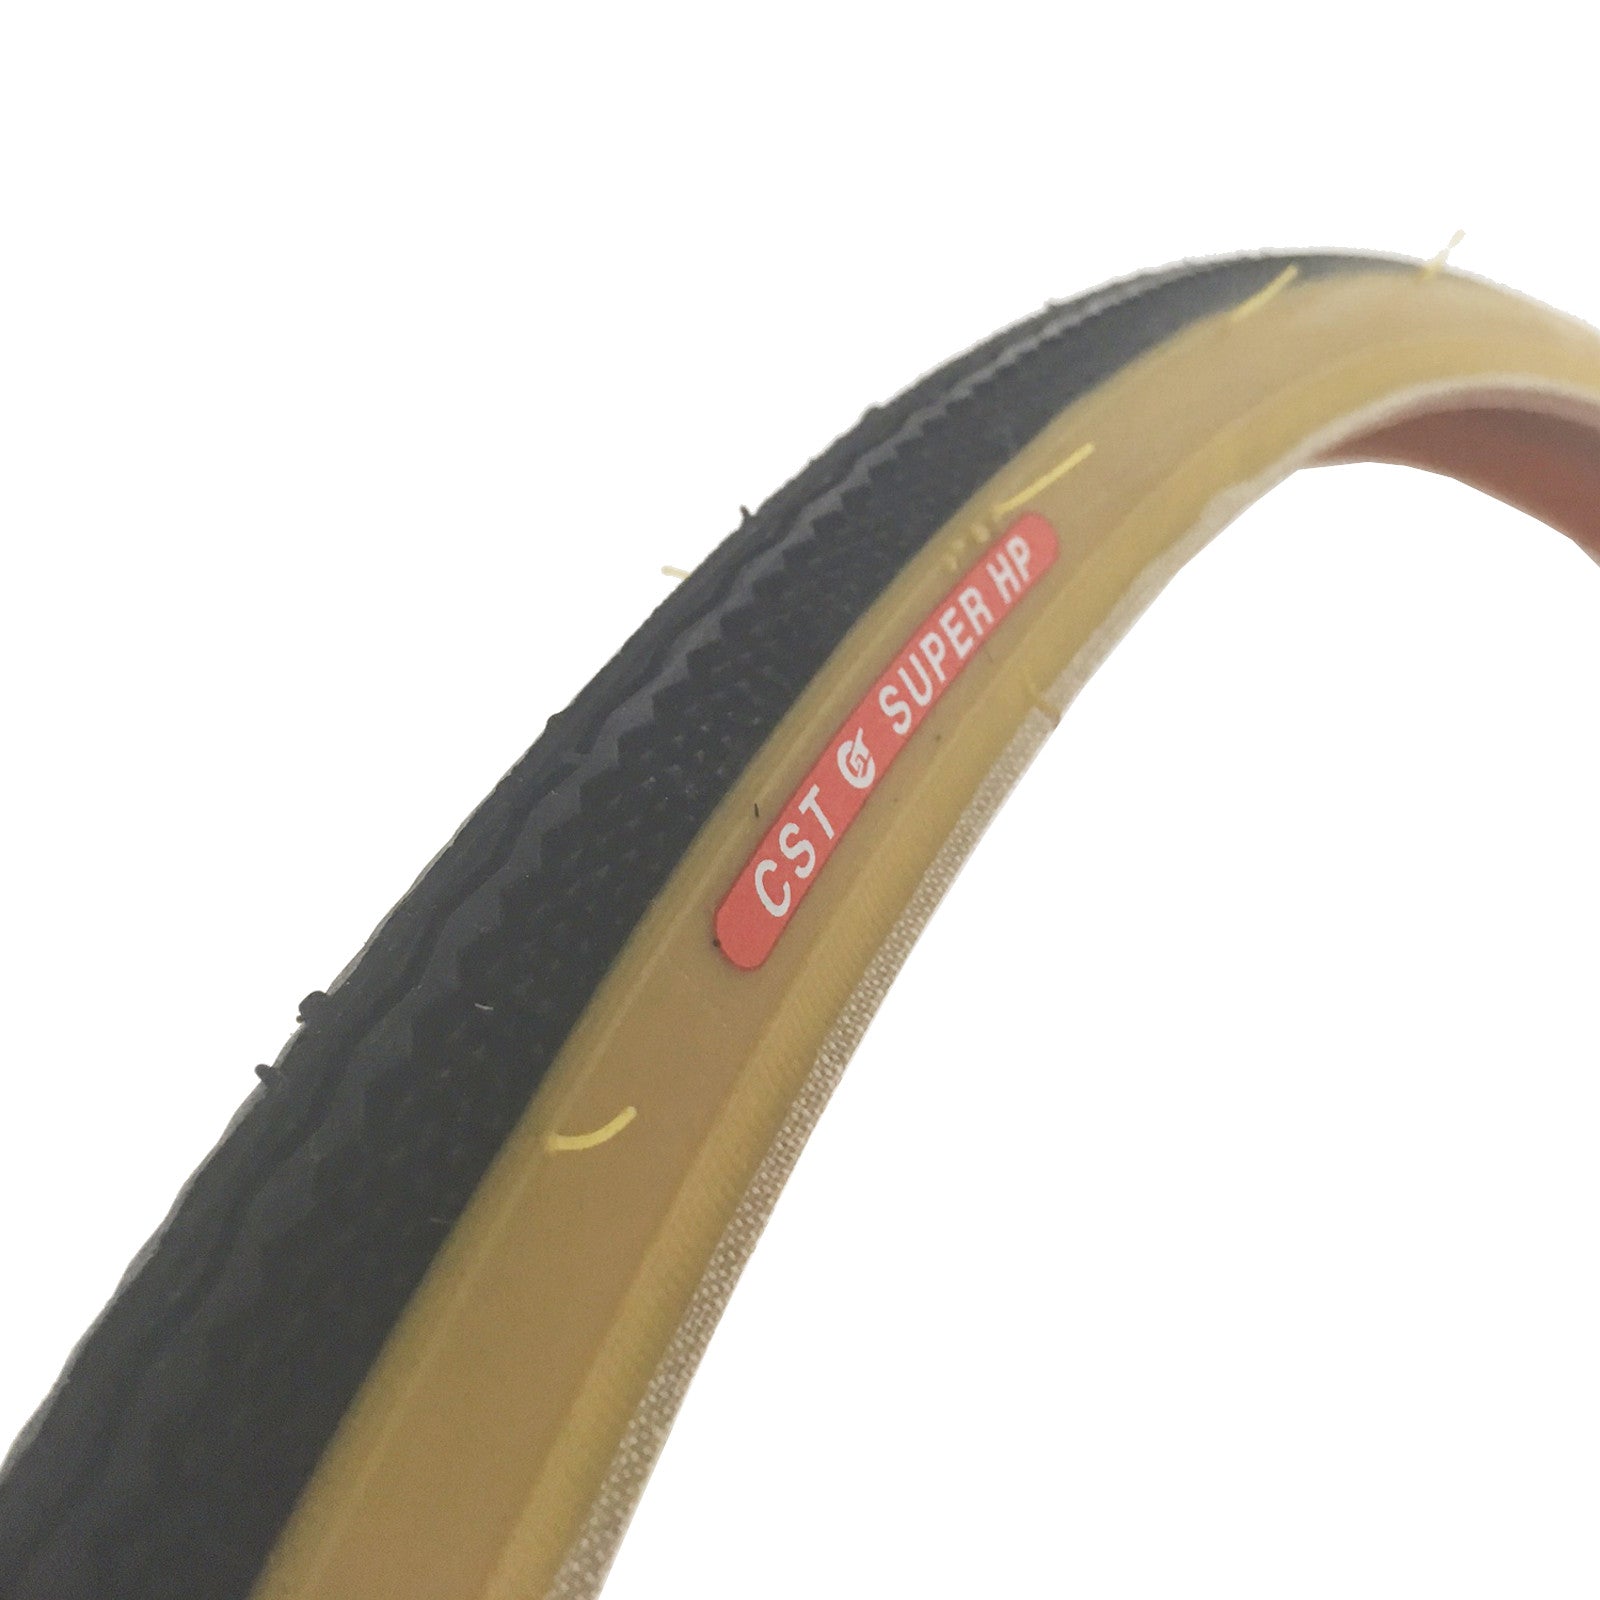 Raleigh CST T1240 Traditional 700 x 28c Road Bike Tyre Alternate 2